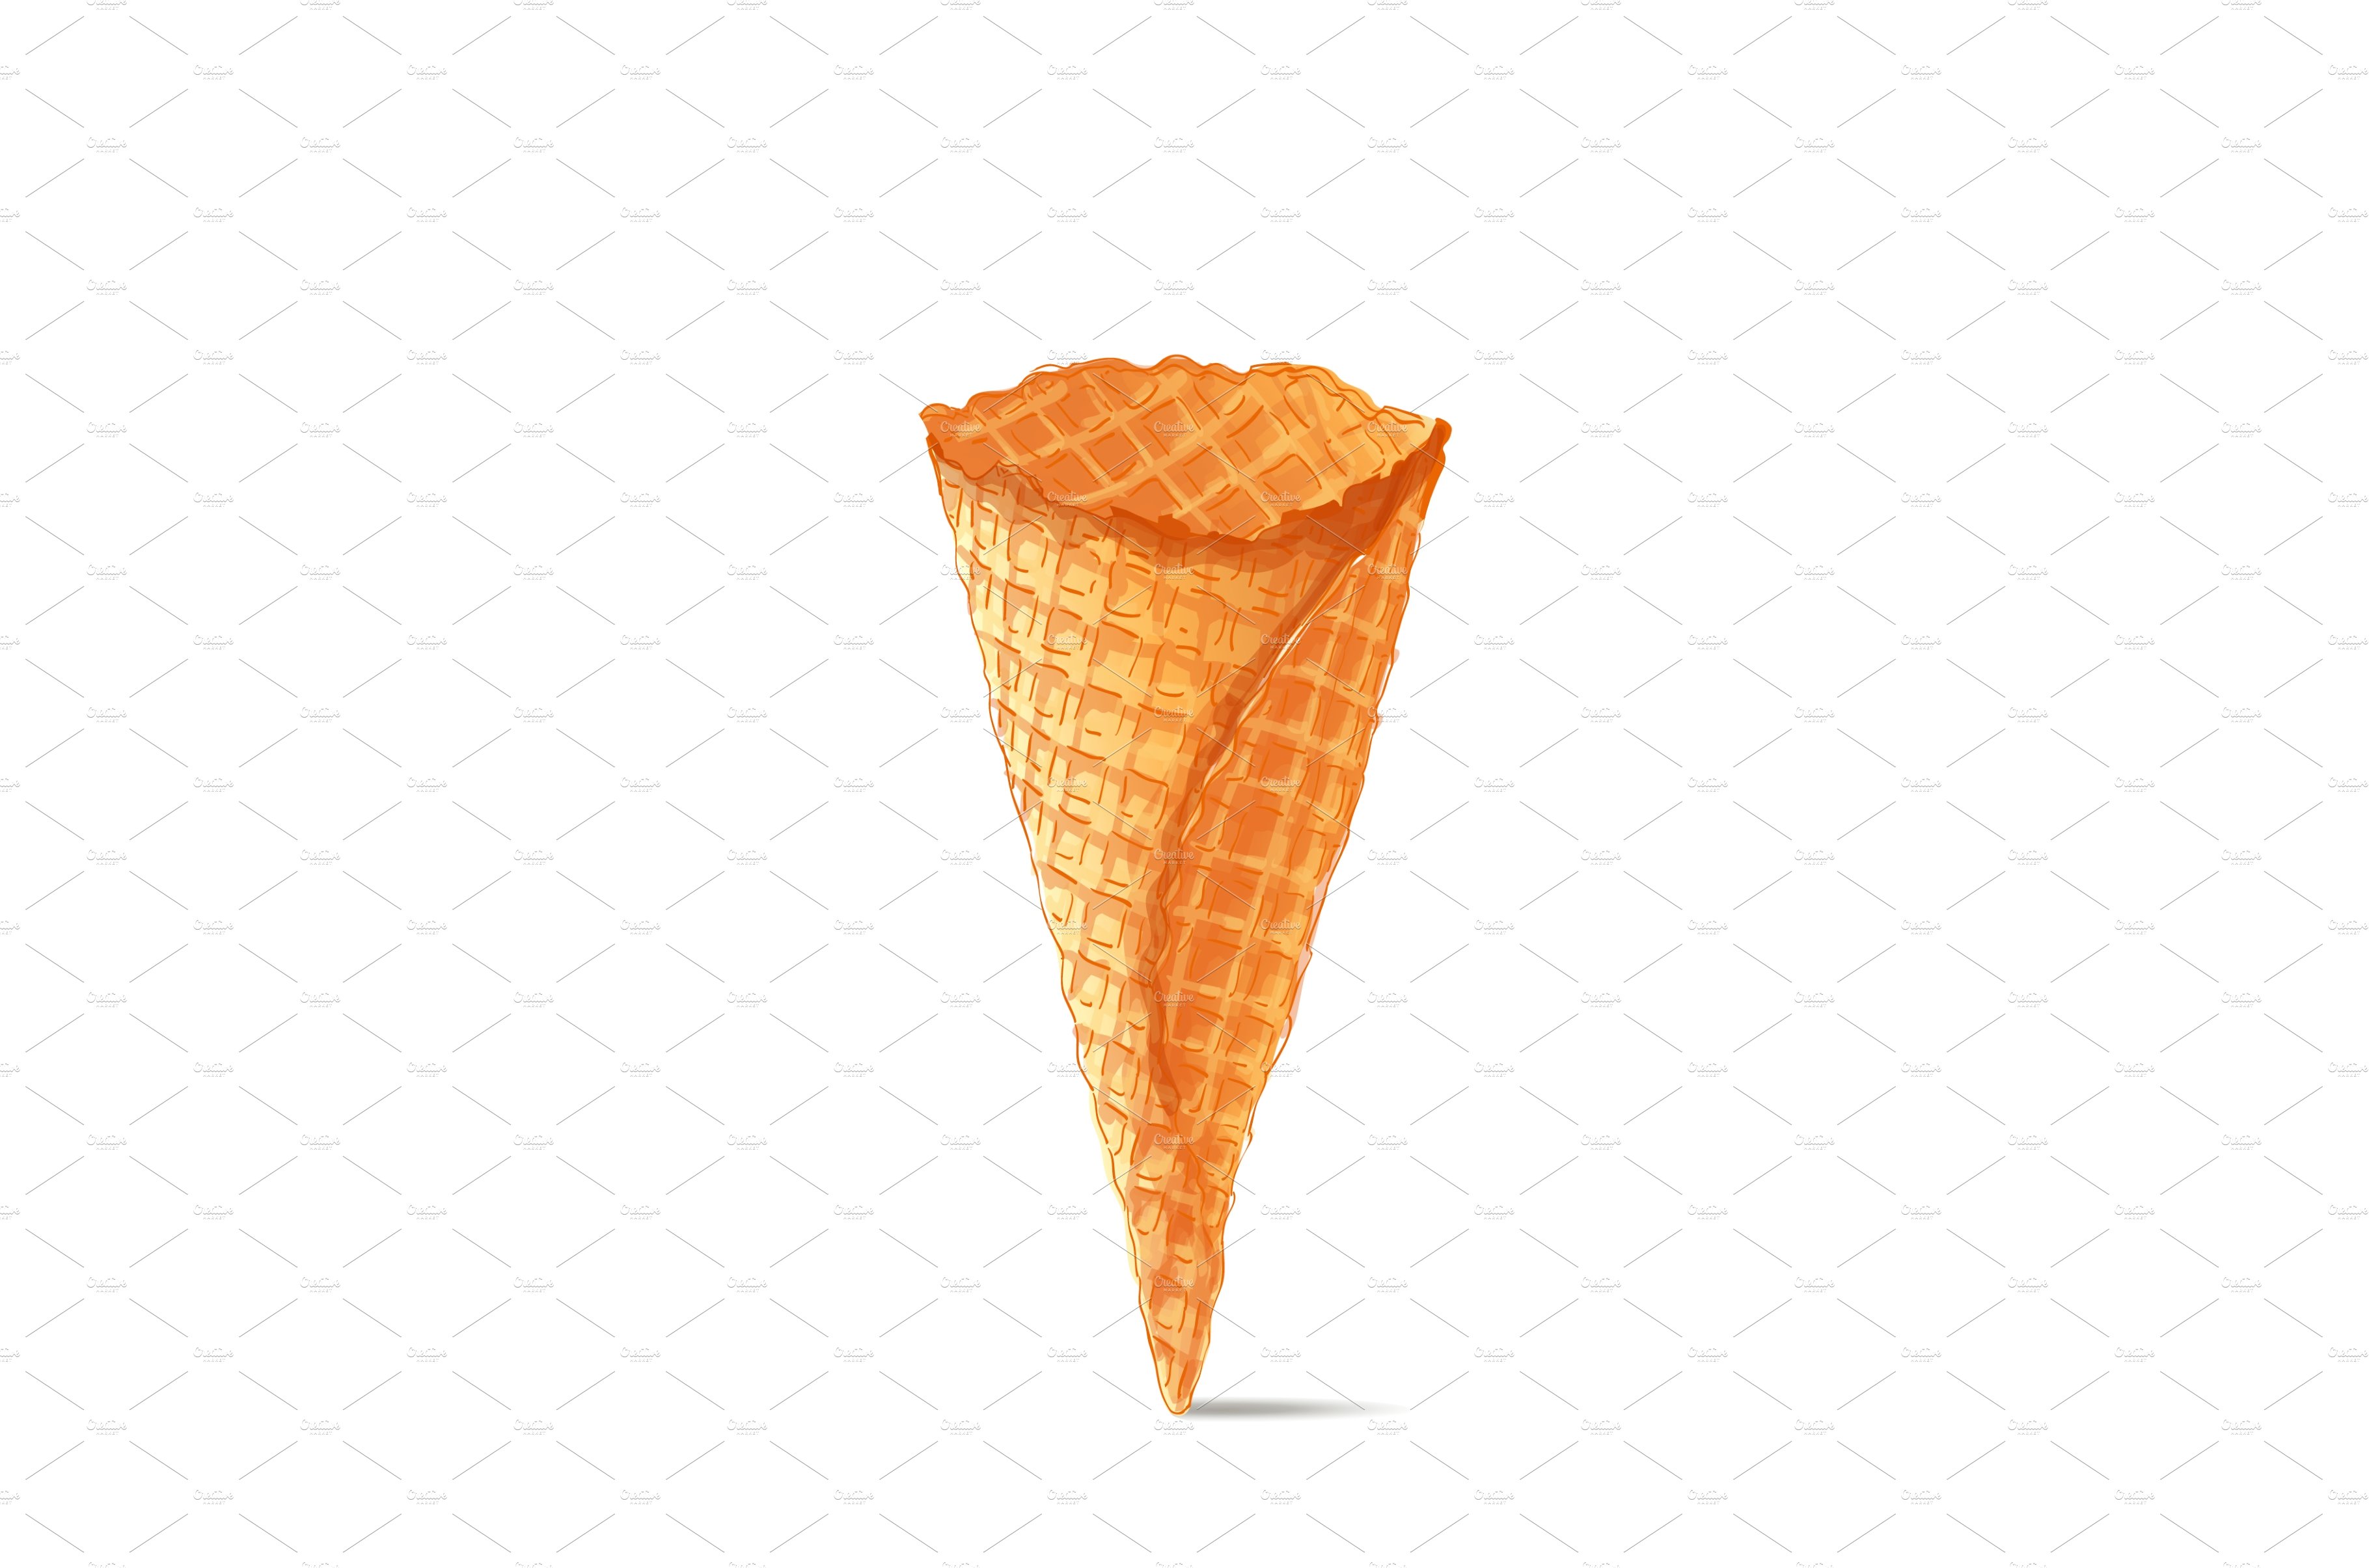 ice-cream scoops in waffle cones cover image.